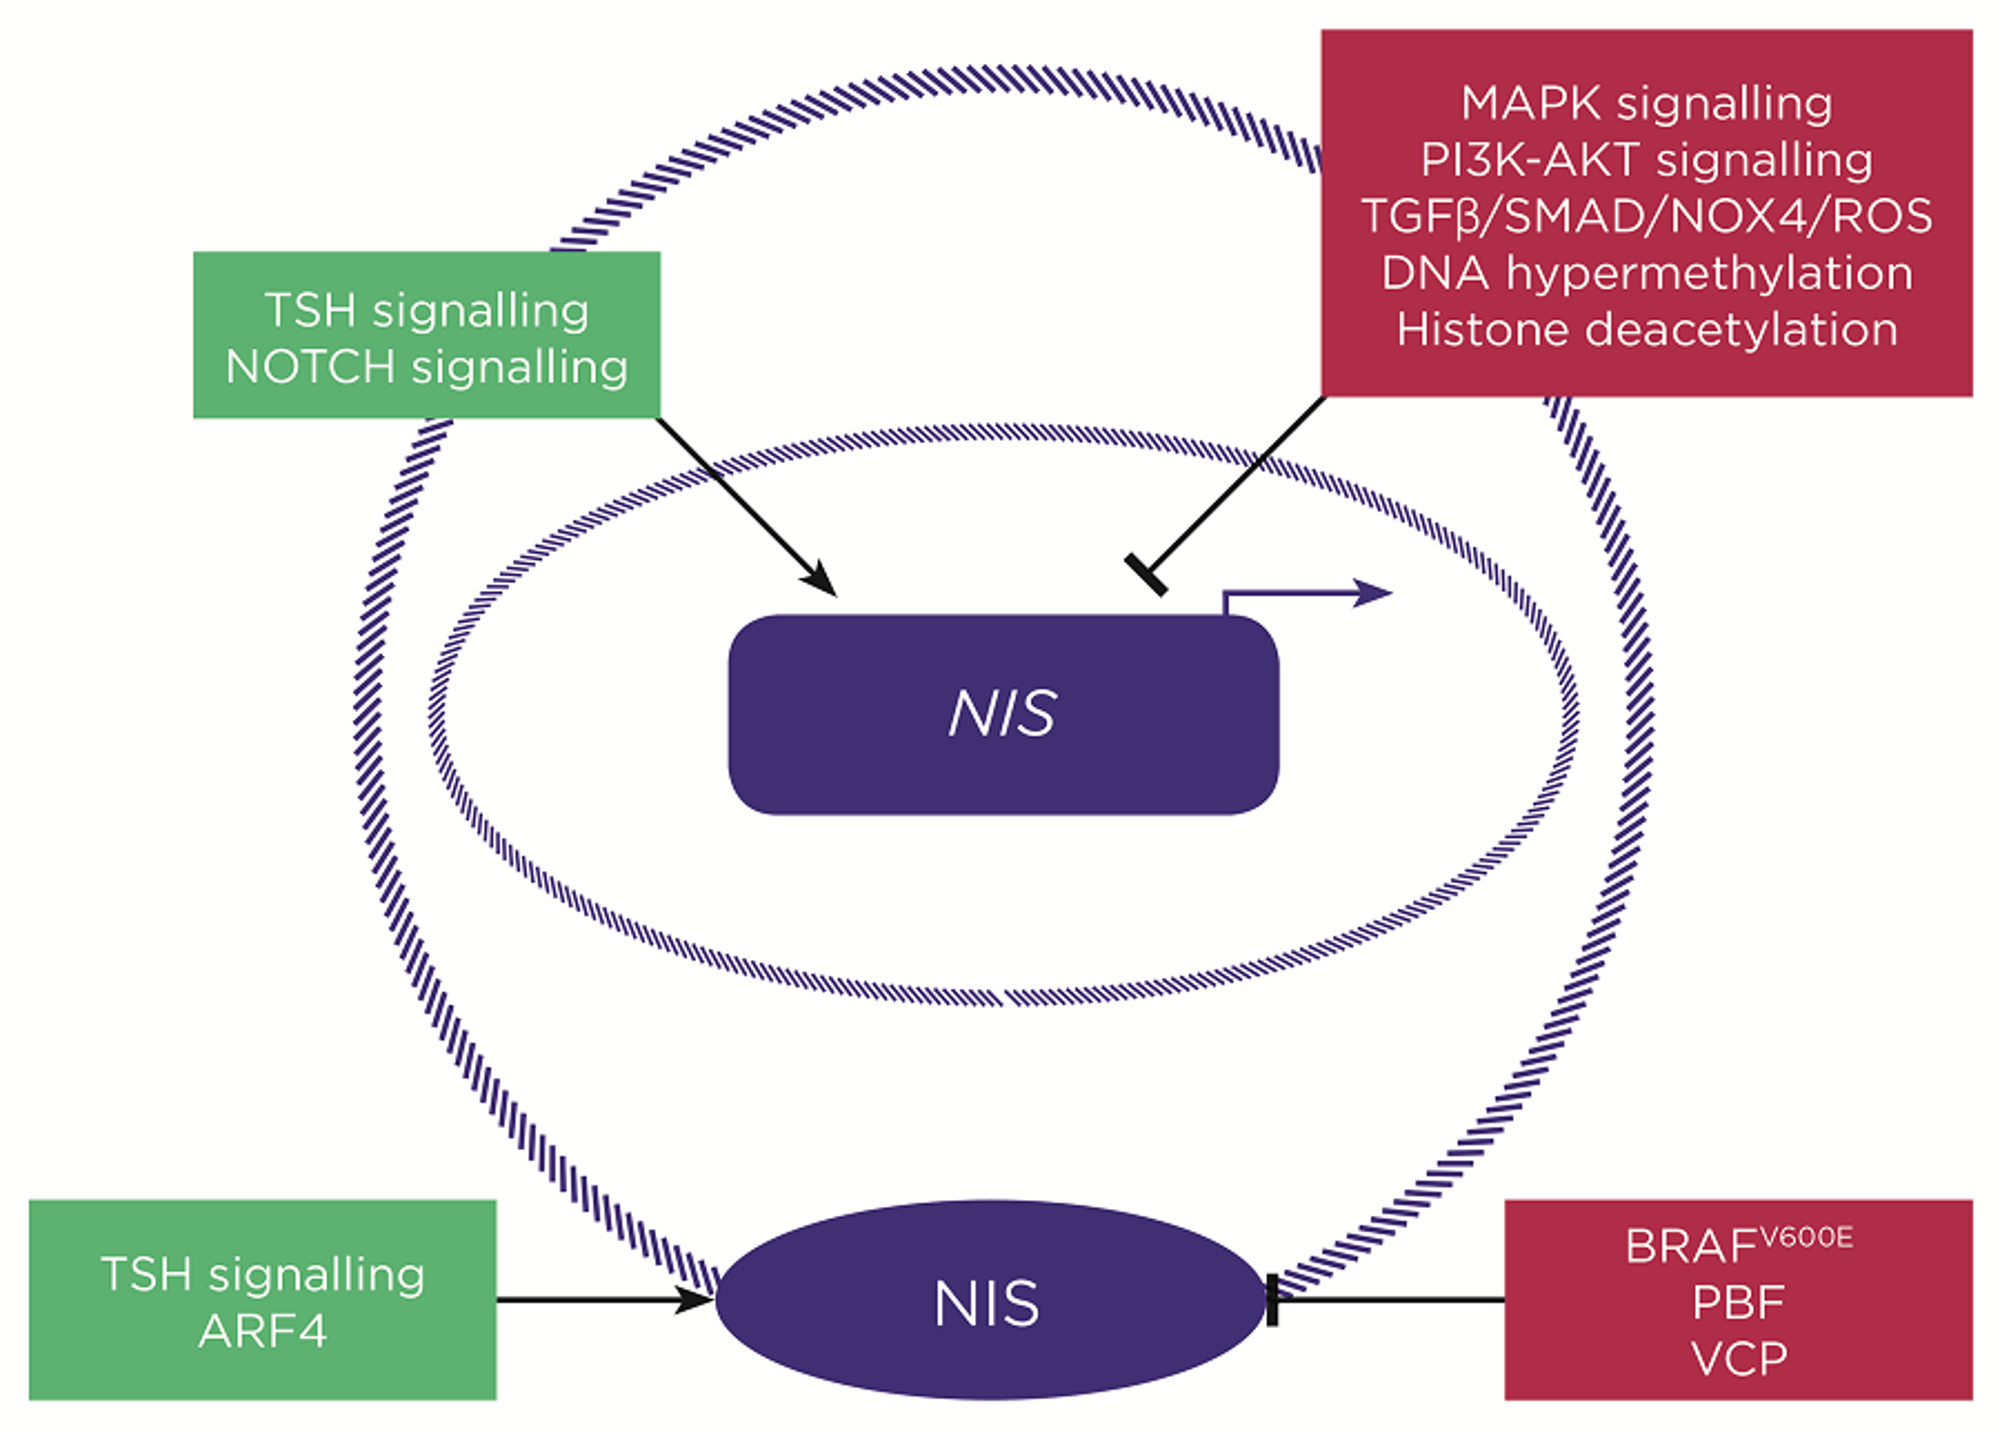 Simplified schematic highlighting some of the key known regulators of NIS gene expression (above) and NIS plasma membrane localisation (below). Green boxes = inducers of NIS expression/function; red boxes = inhibitors of NIS expression/function. &#169;V. Smith